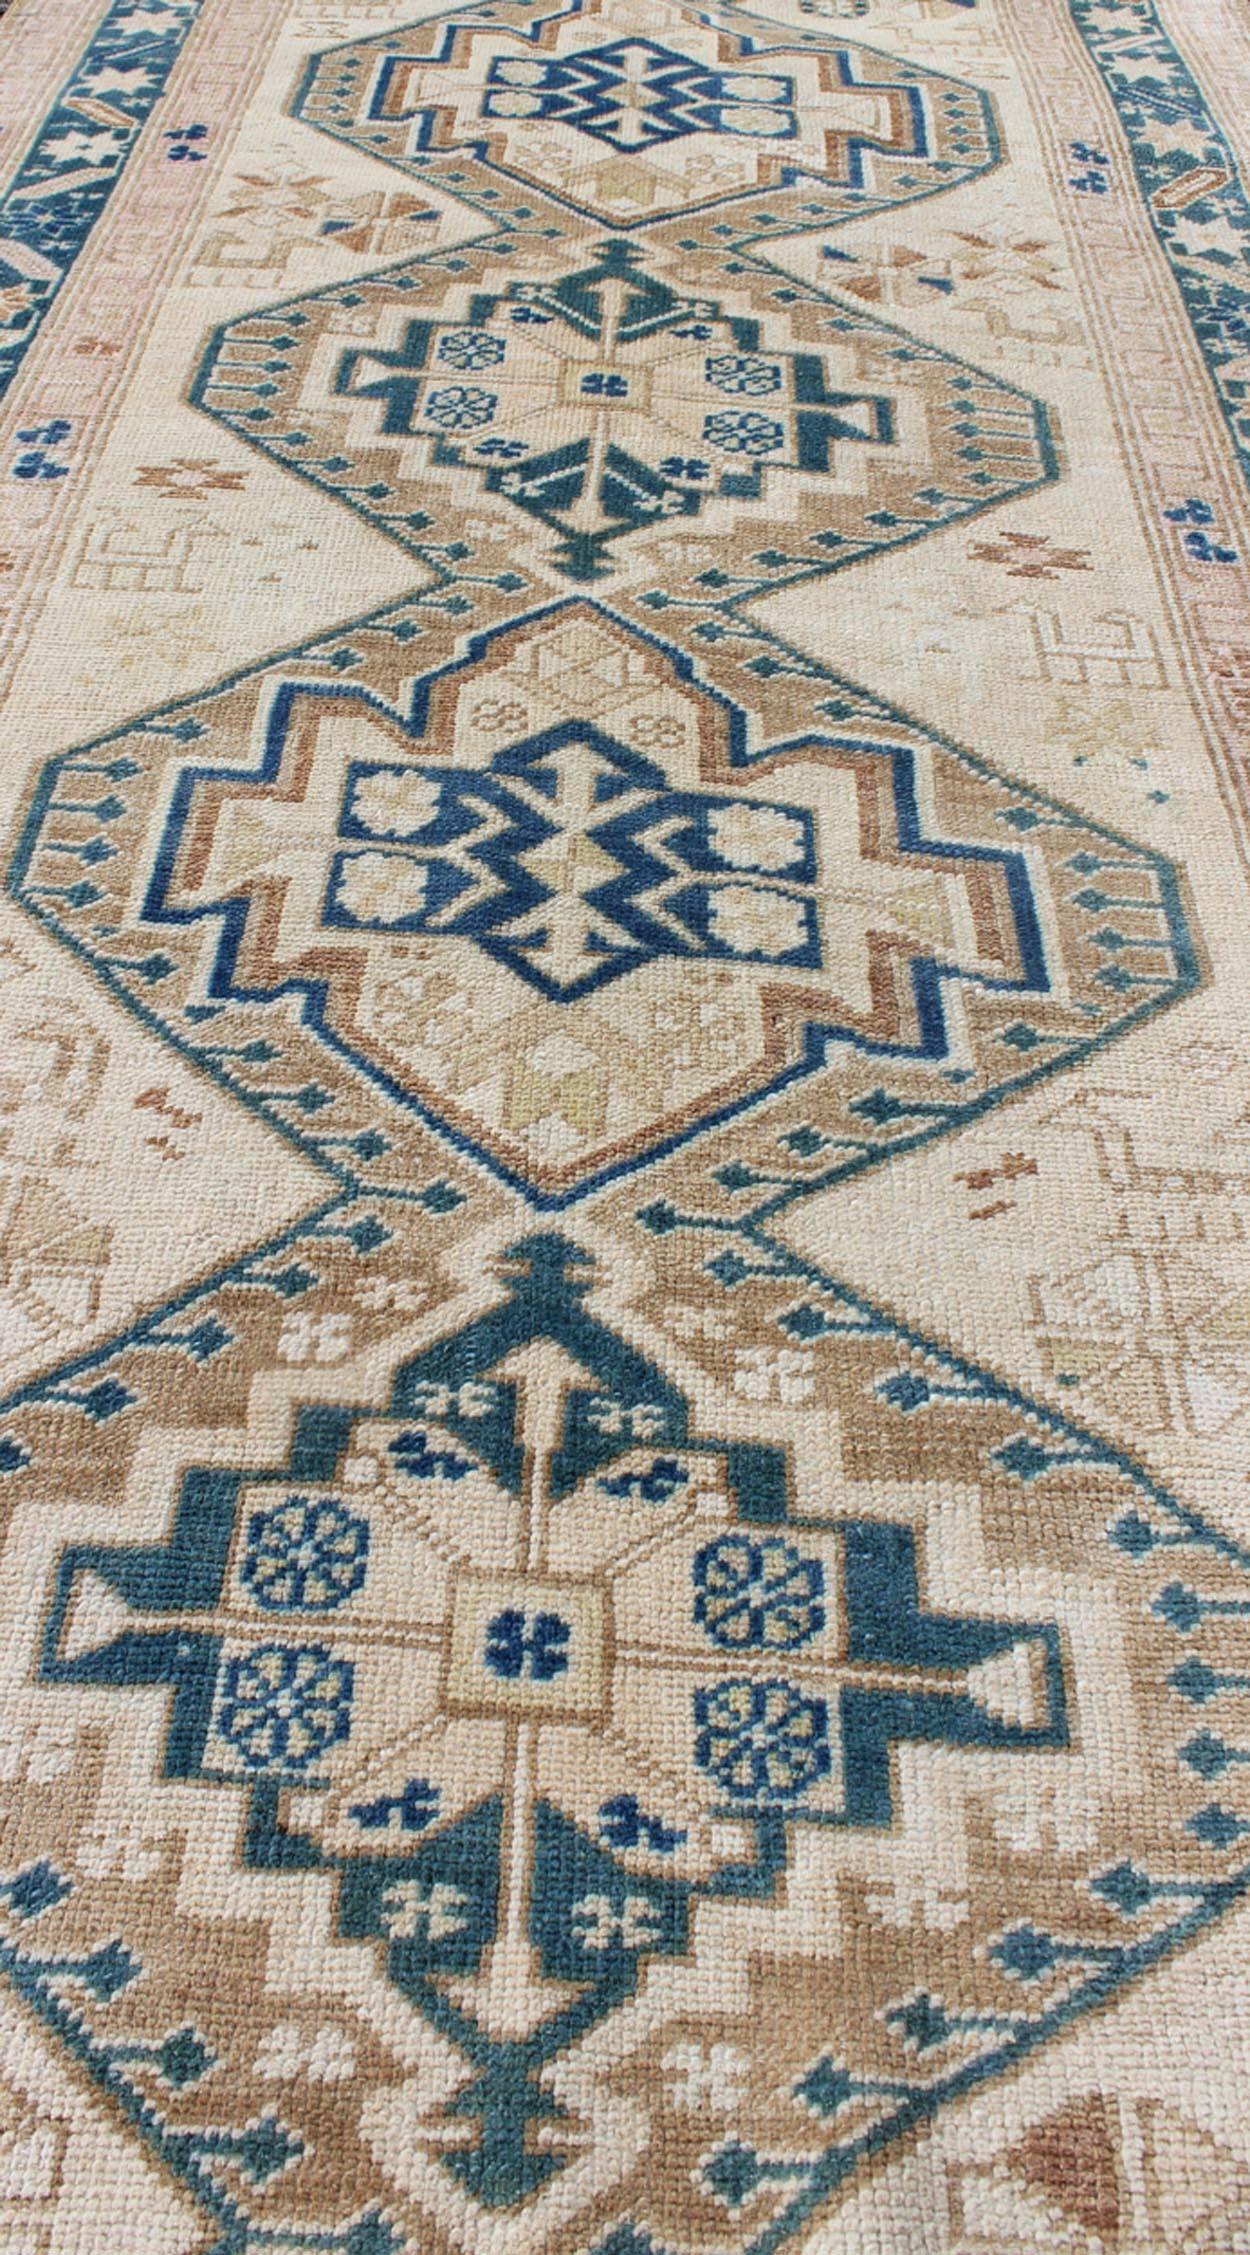 Early 20th Century Stacked Medallion Antique Turkish Oushak Rug in Teal, Ivory, Cream and Nude For Sale